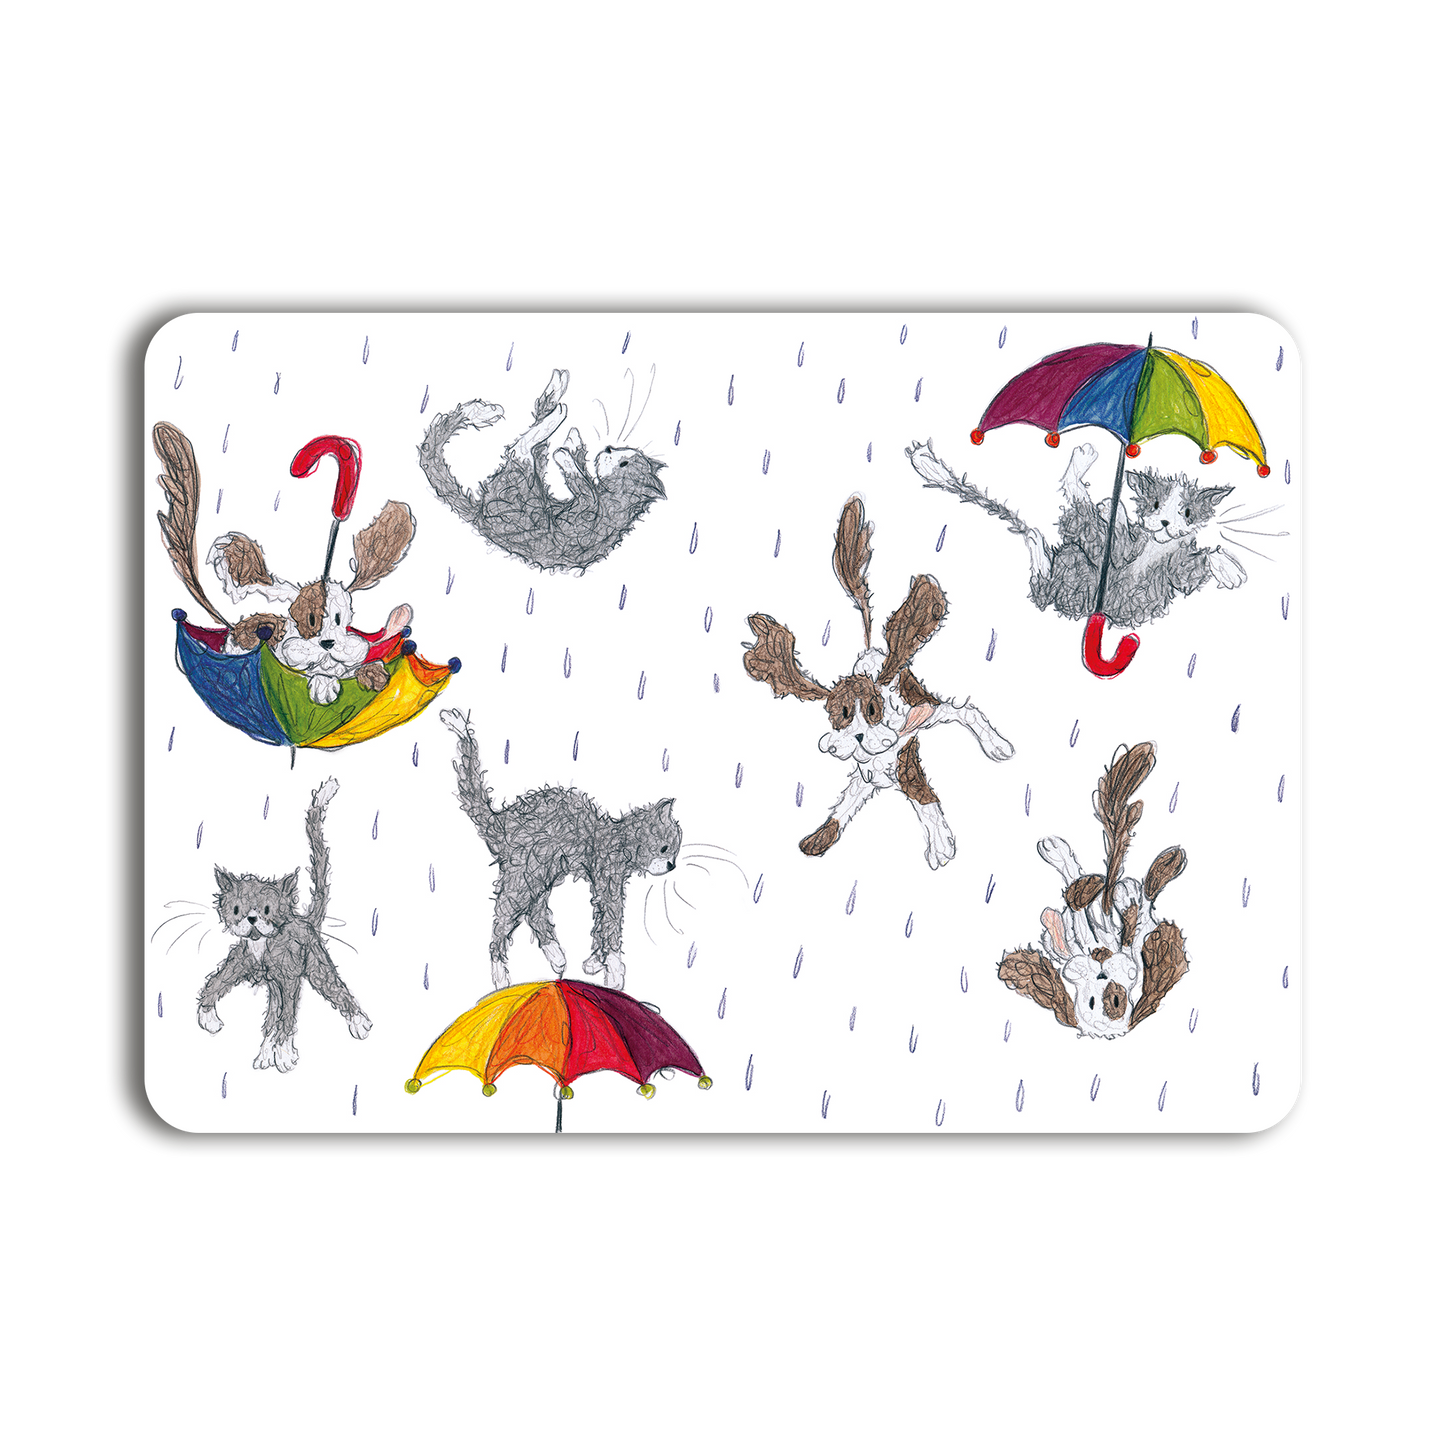 Its raining cats and dogs